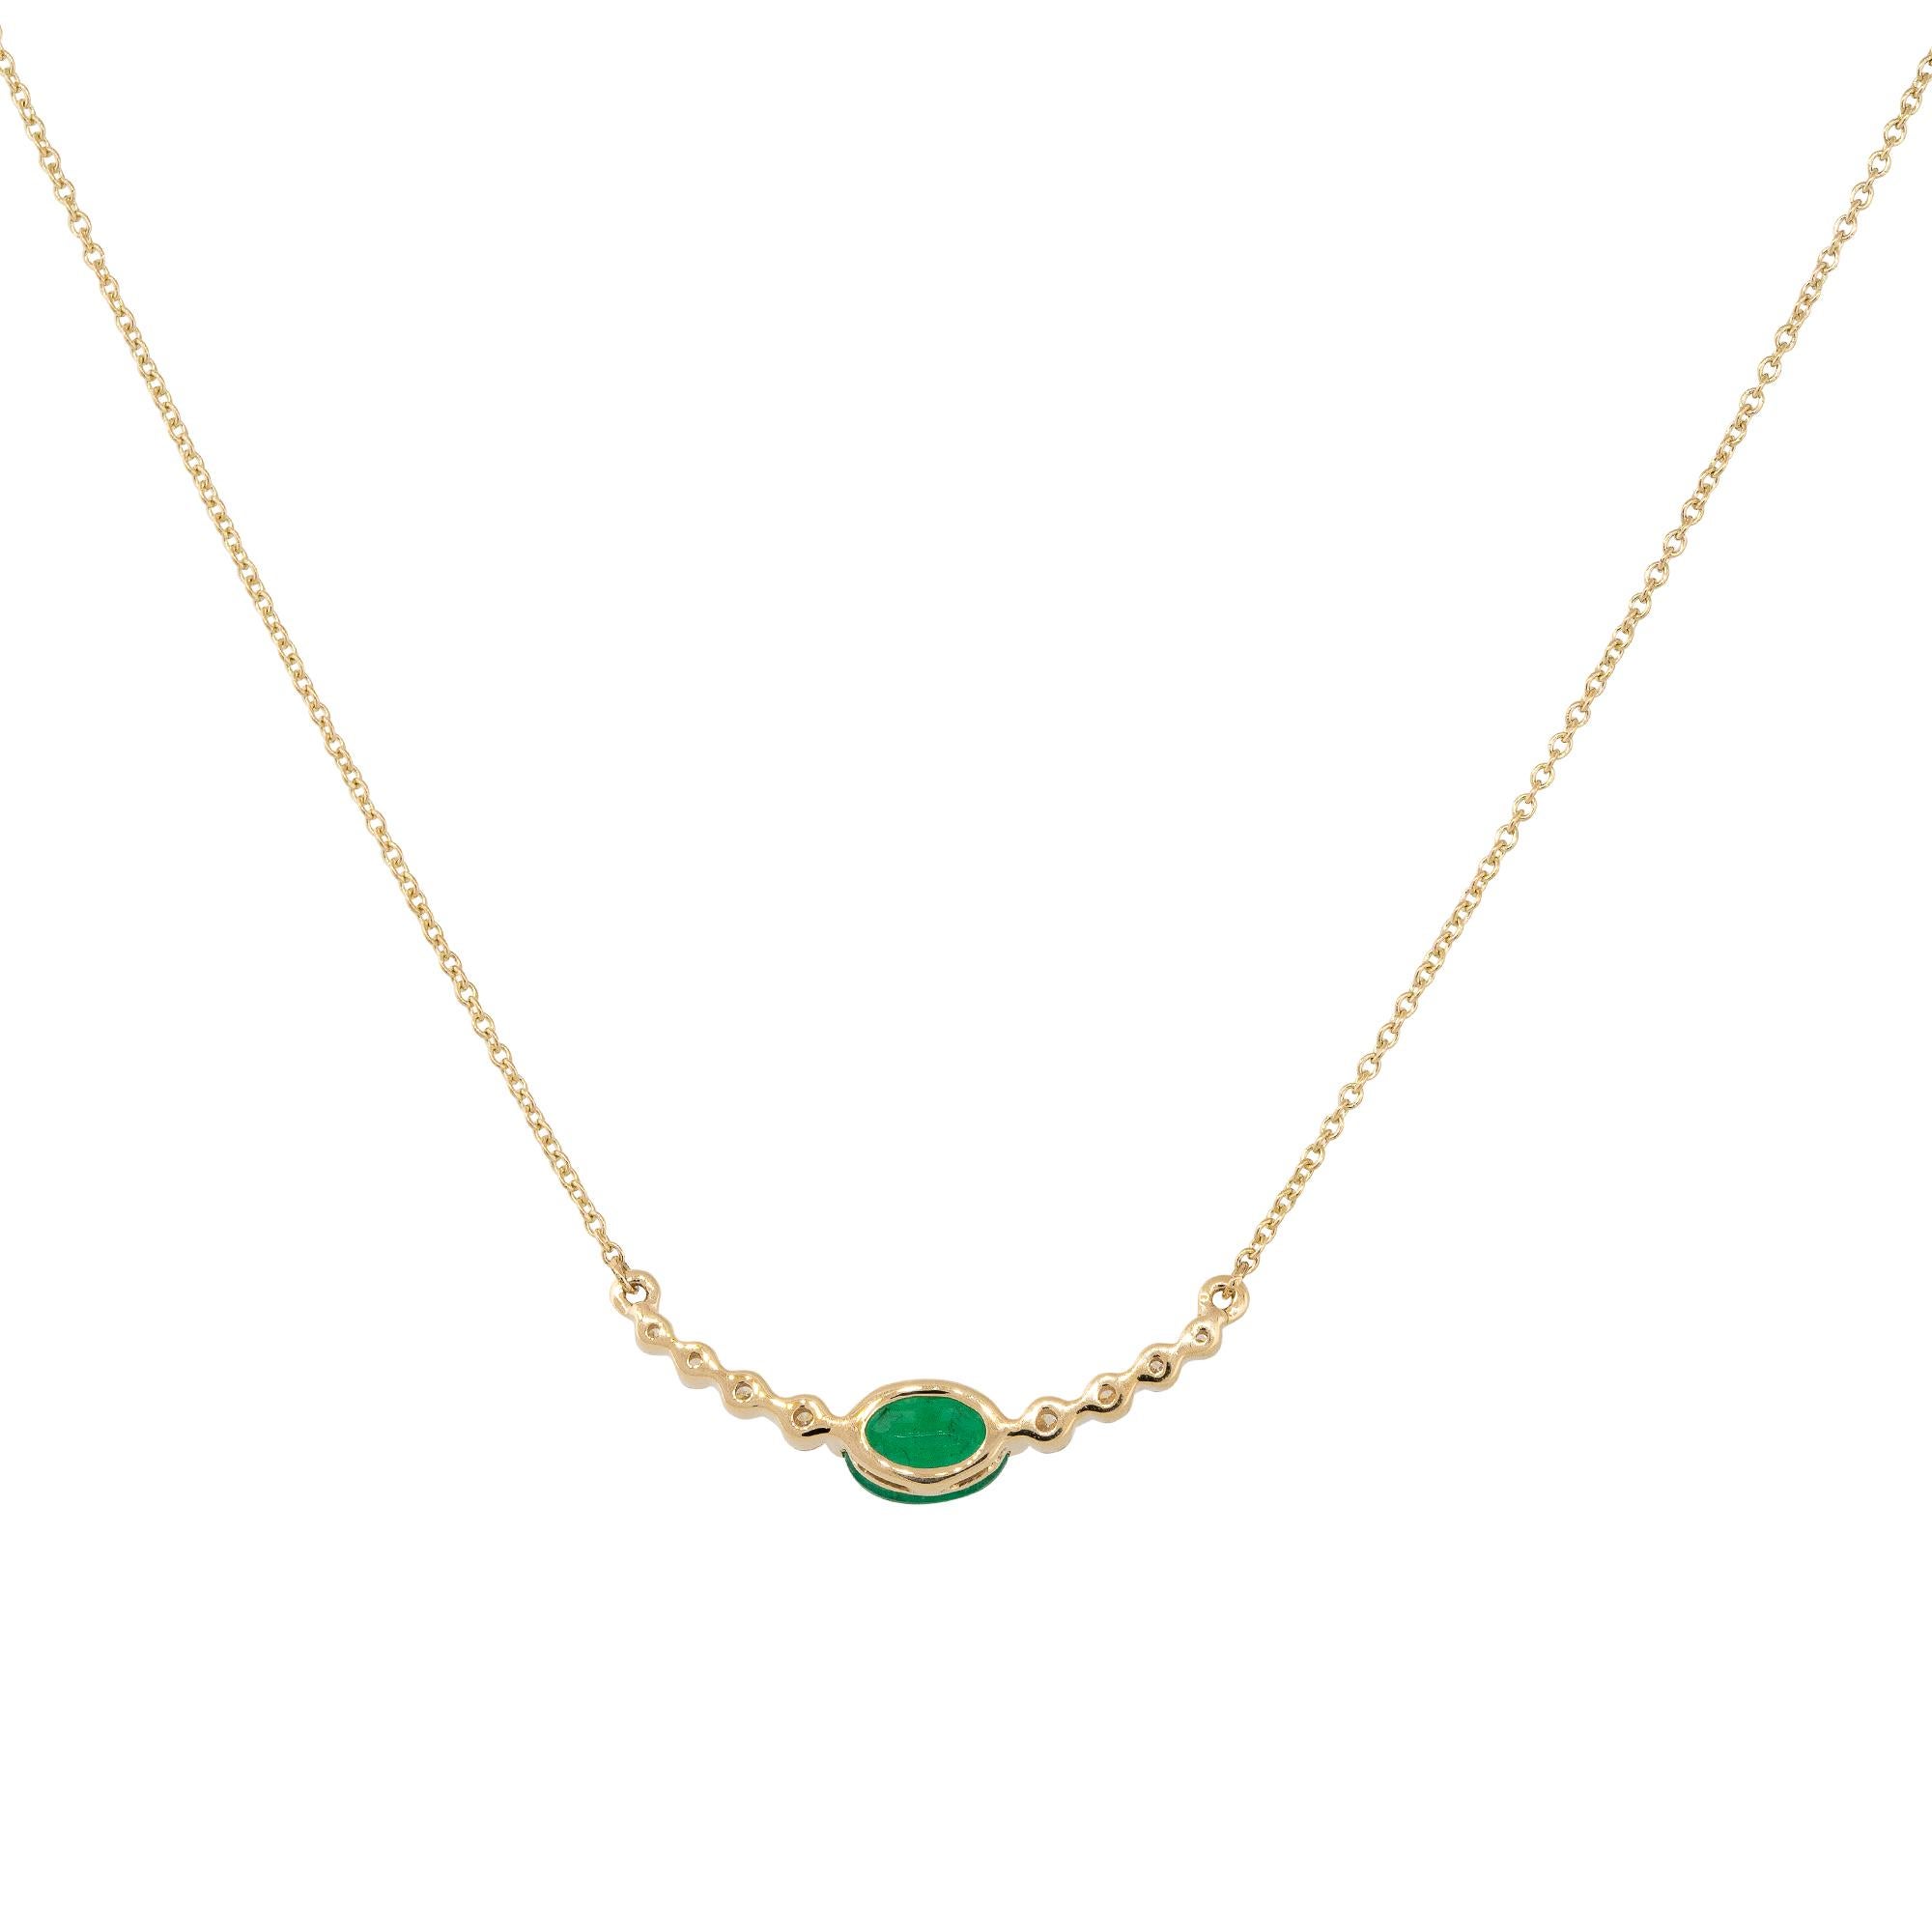 14k Yellow Gold 0.85ctw Oval Emerald and Diamond Curved Bar Necklace

Material: 14k Yellow Gold
Gemstone/Diamond Details: Approximately 0.85ctw of Oval shaped Emerald. Approximately 0.21ctw of Round Diamonds
Measurements: Necklace Measures 18.5″ in